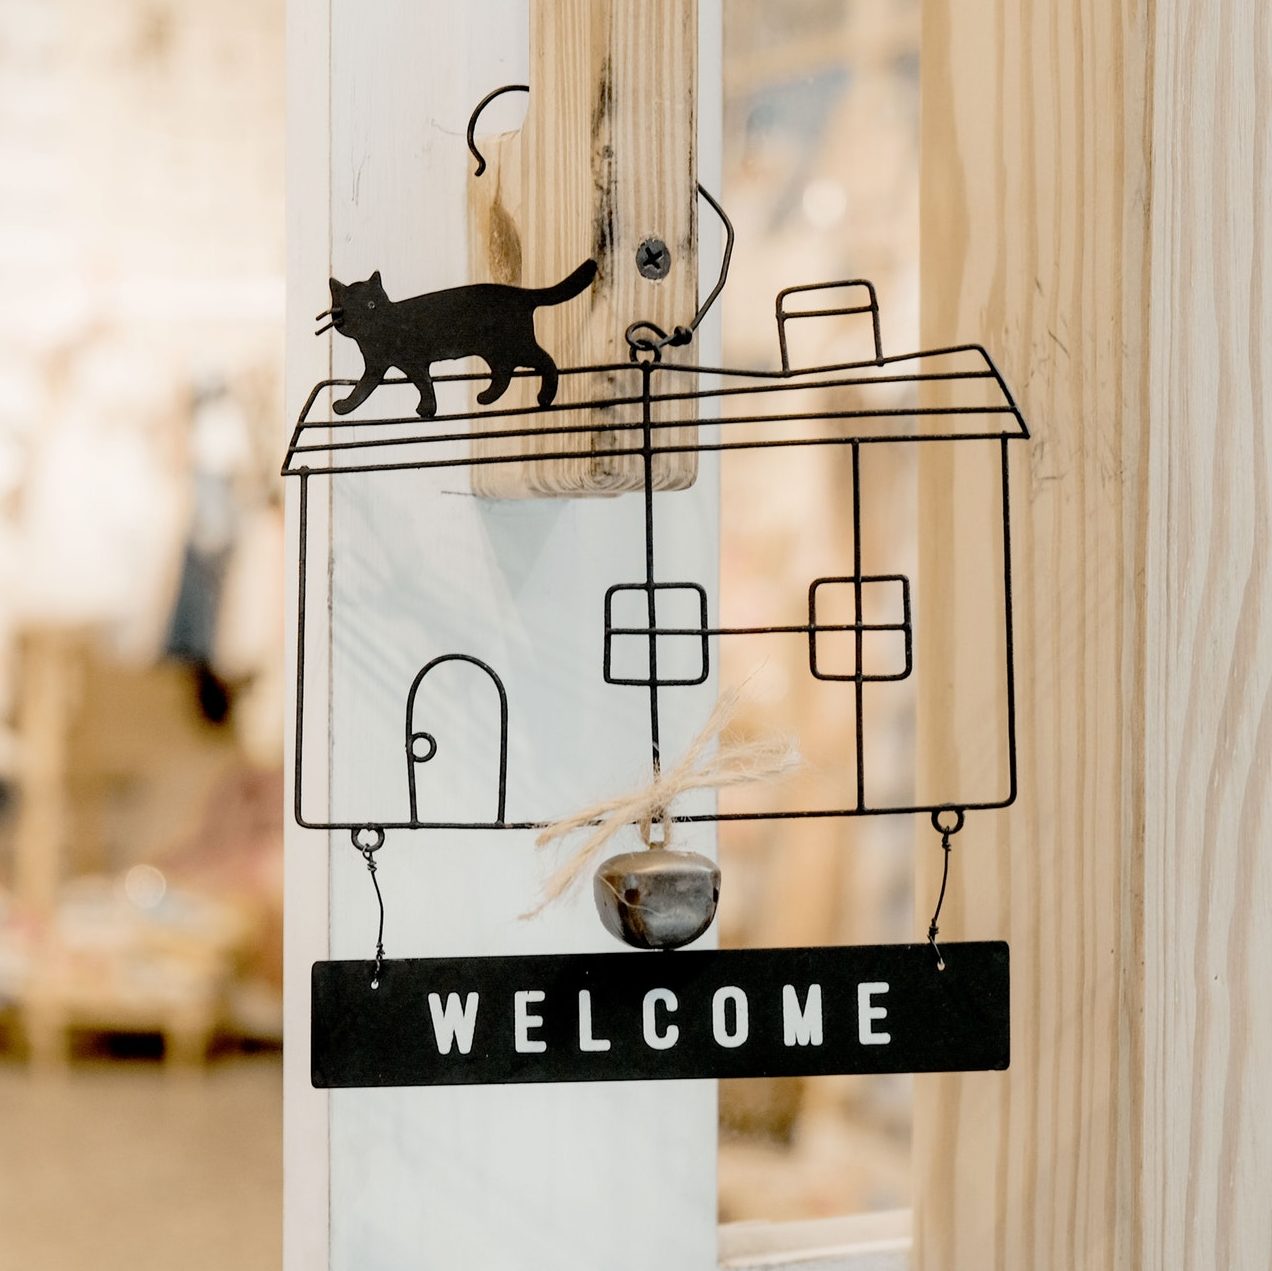 A welcome sign | Pierce Real Estate, Hollister, CA 95023